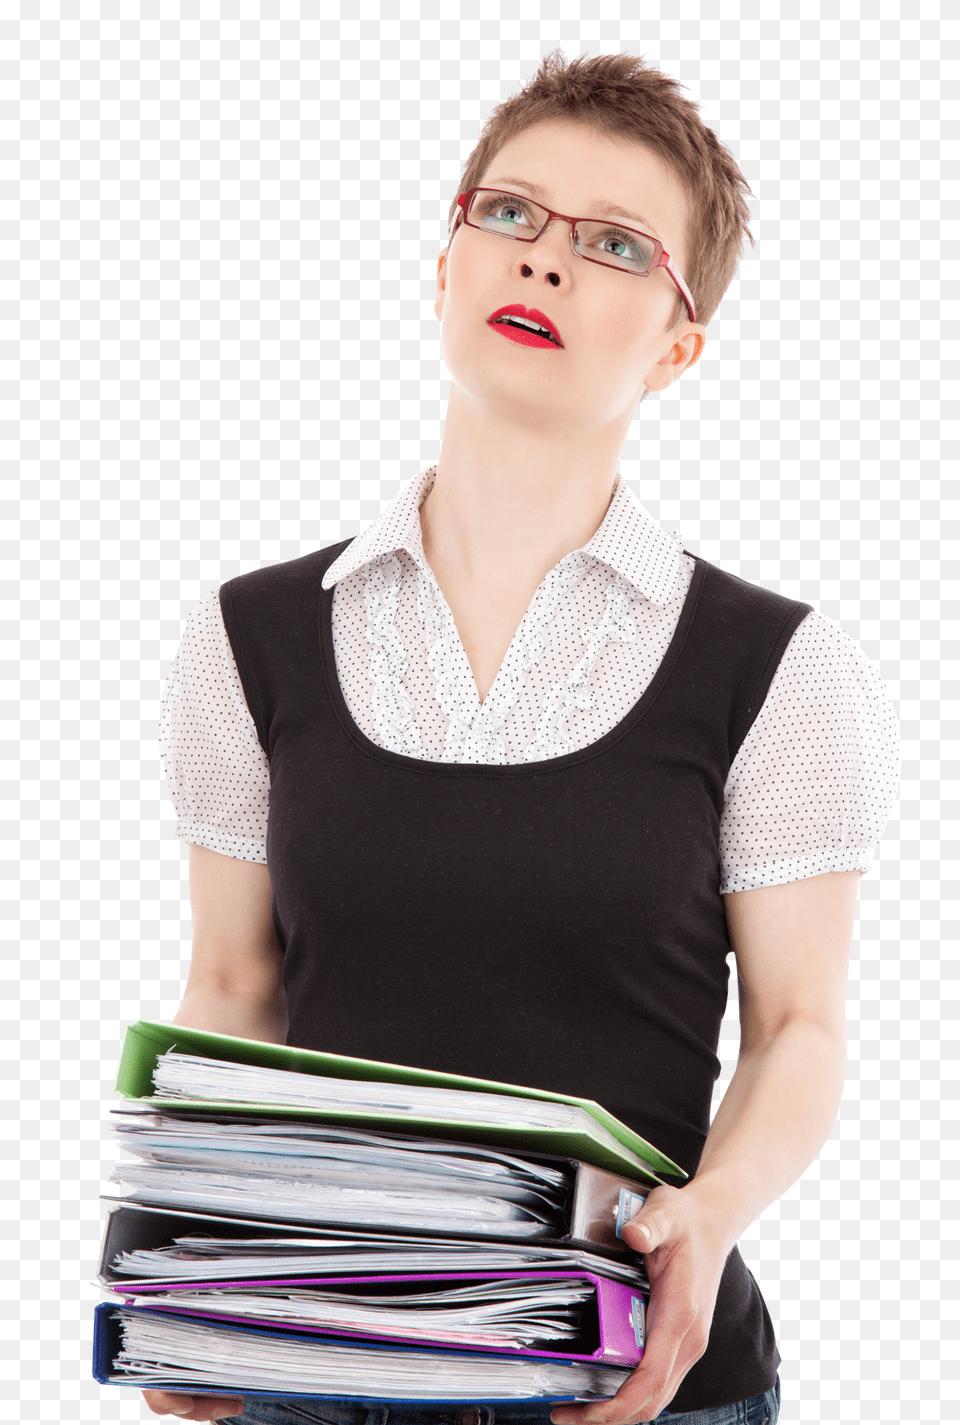 Pngpix Com Female Office Worker Carrying A Stack Of Files, Woman, Adult, Person, Accessories Png